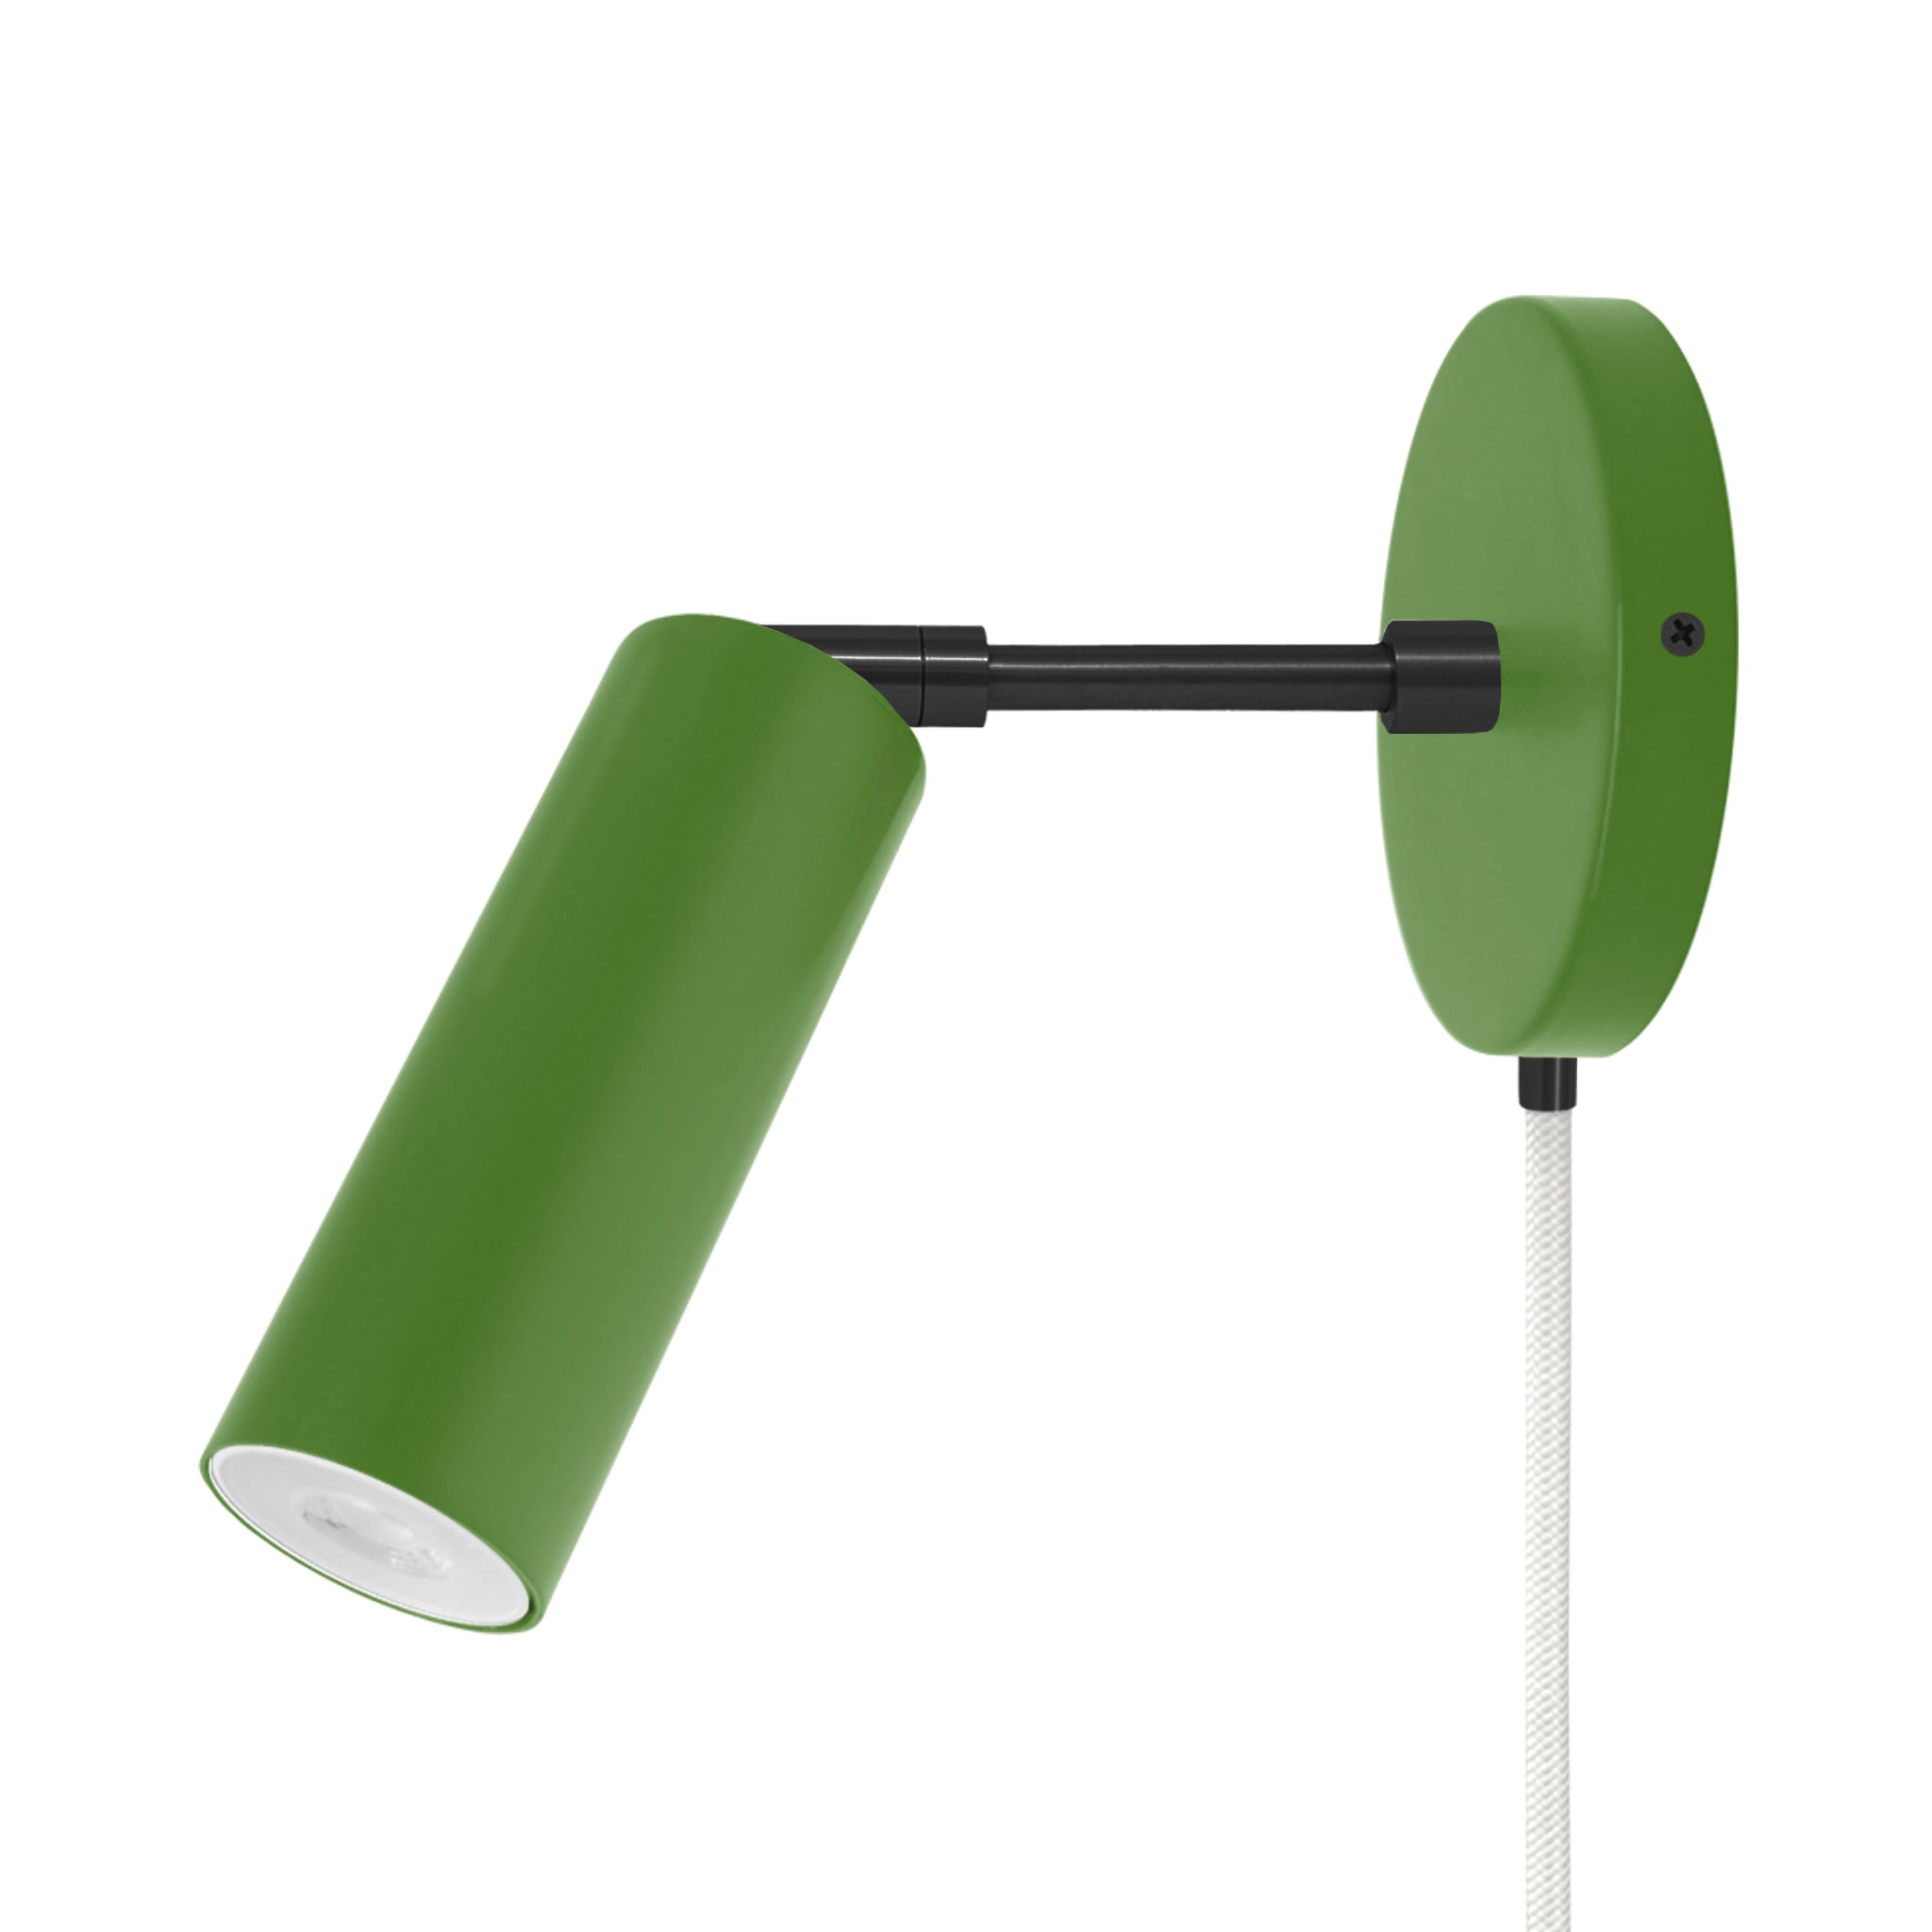 Black and python green color Reader plug-in sconce 3" arm Dutton Brown lighting